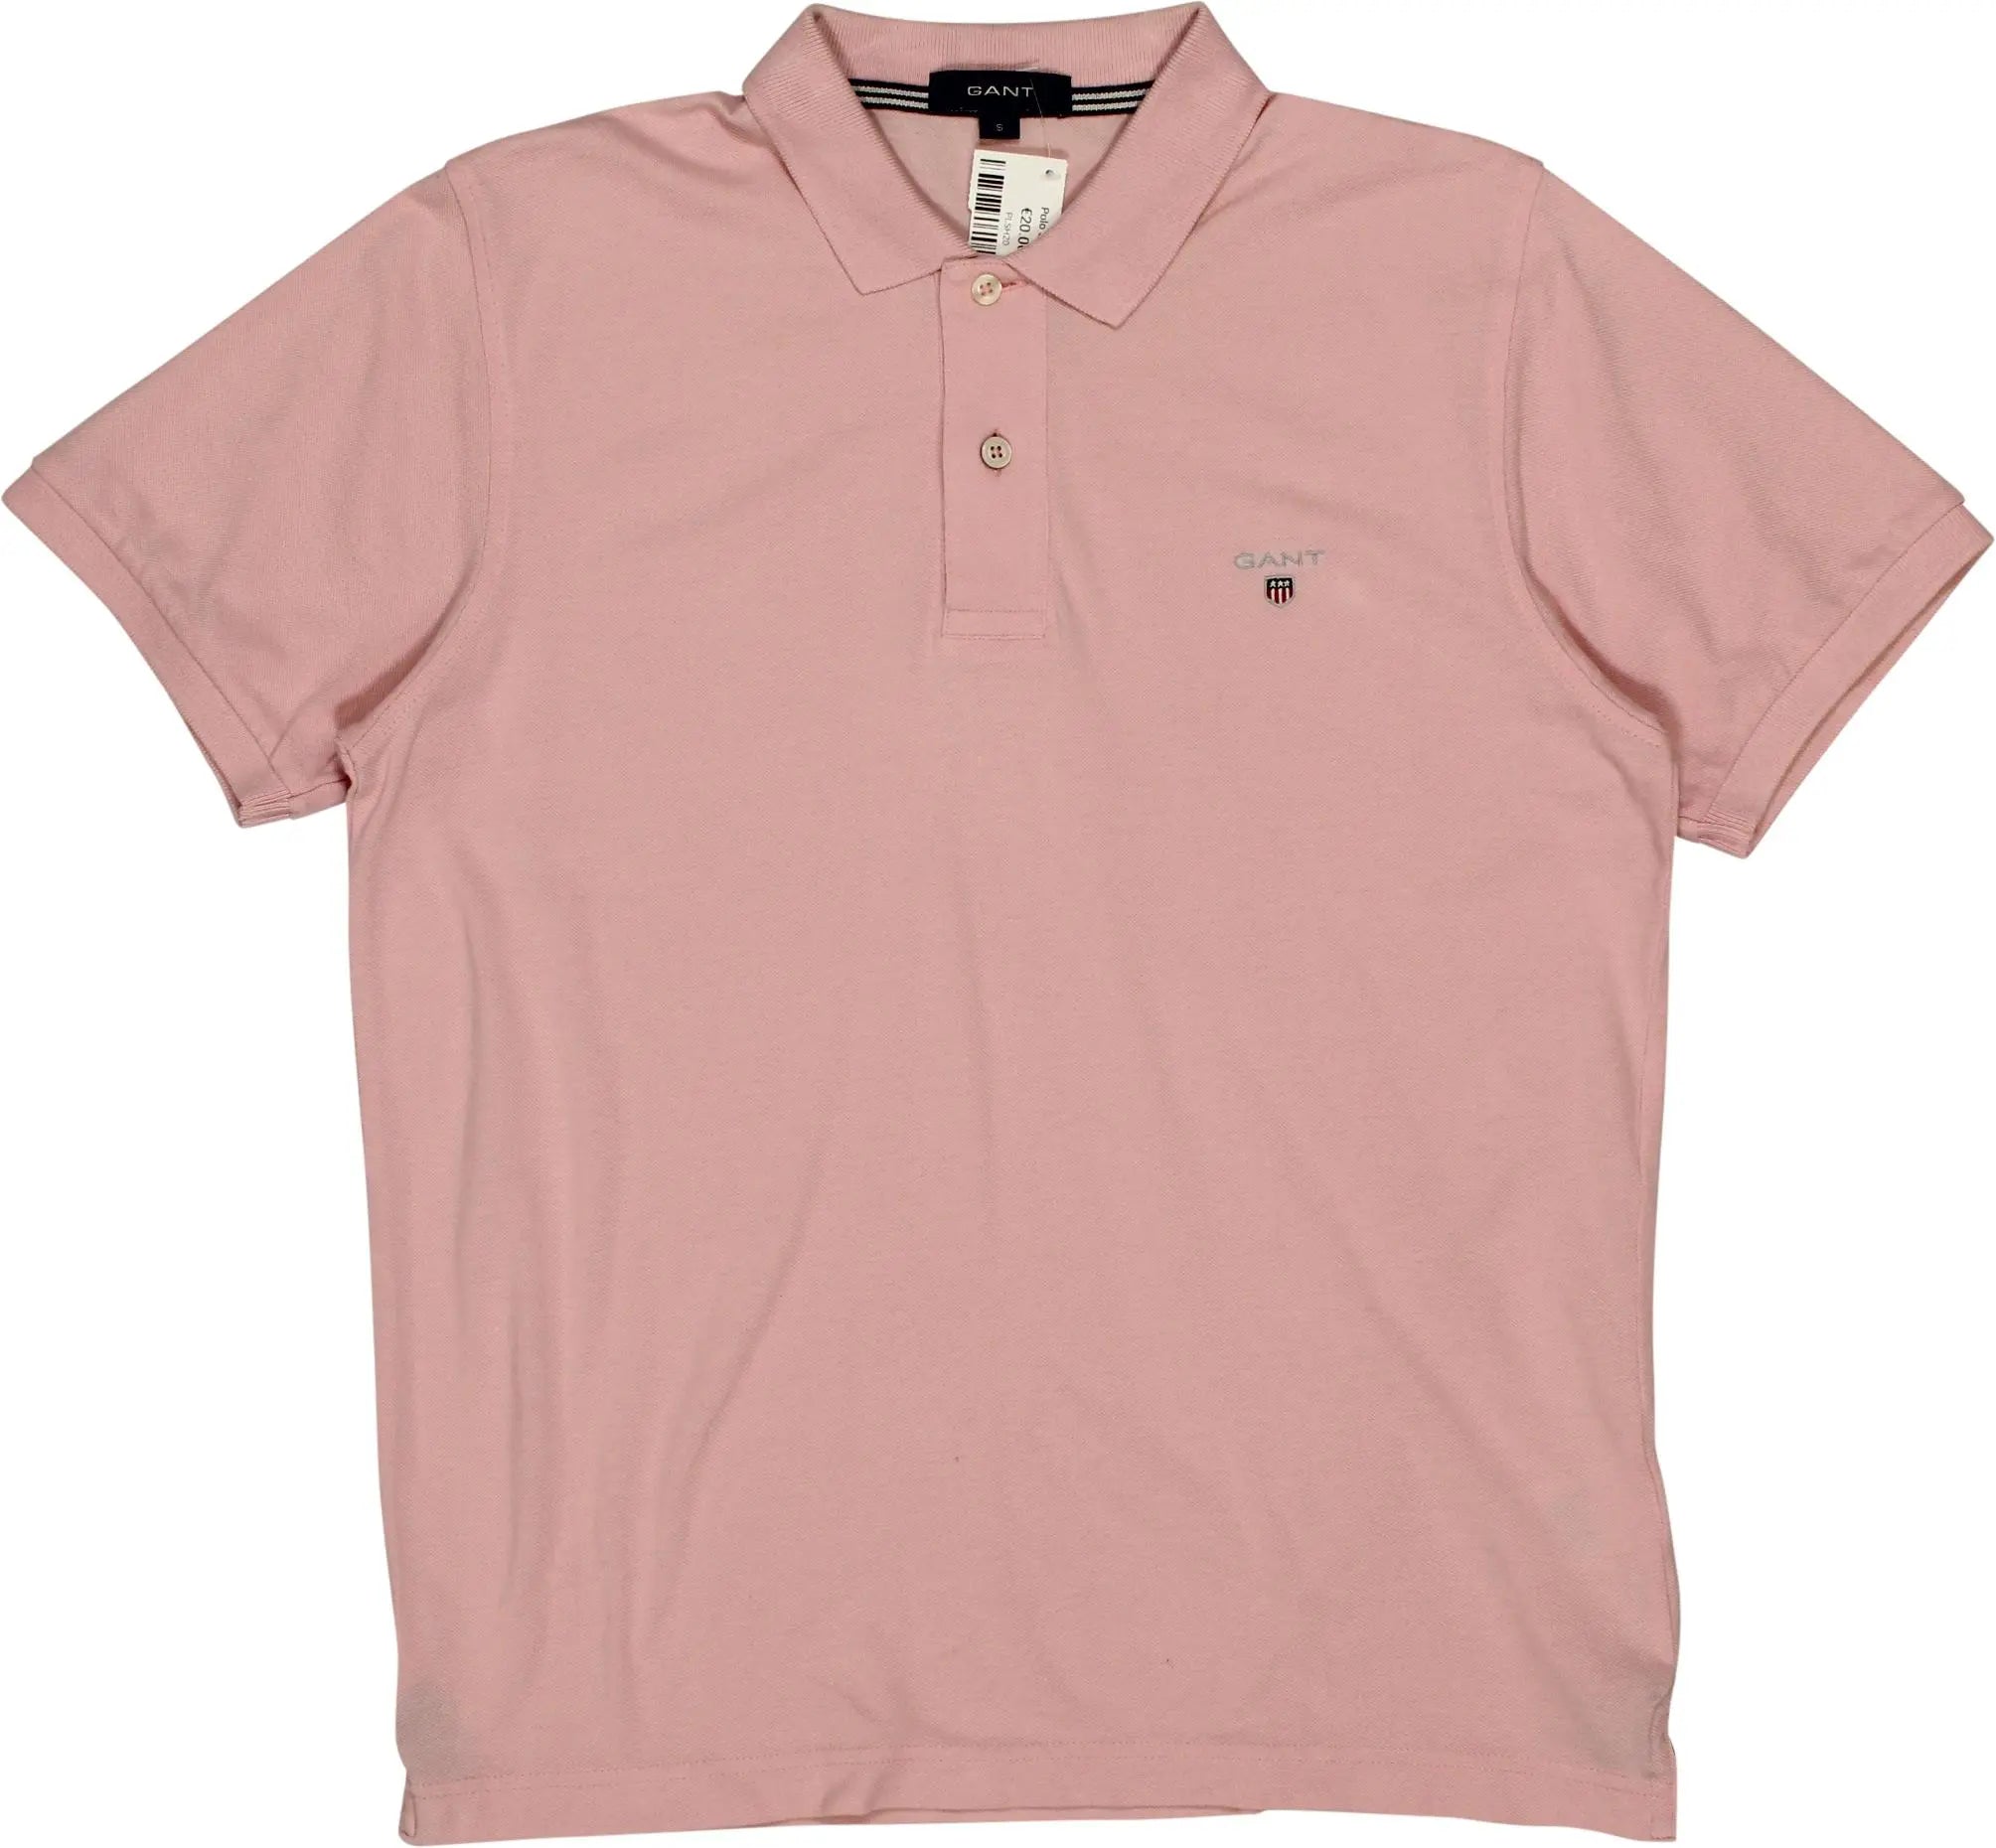 Kappa - Gant Polo- ThriftTale.com - Vintage and second handclothing